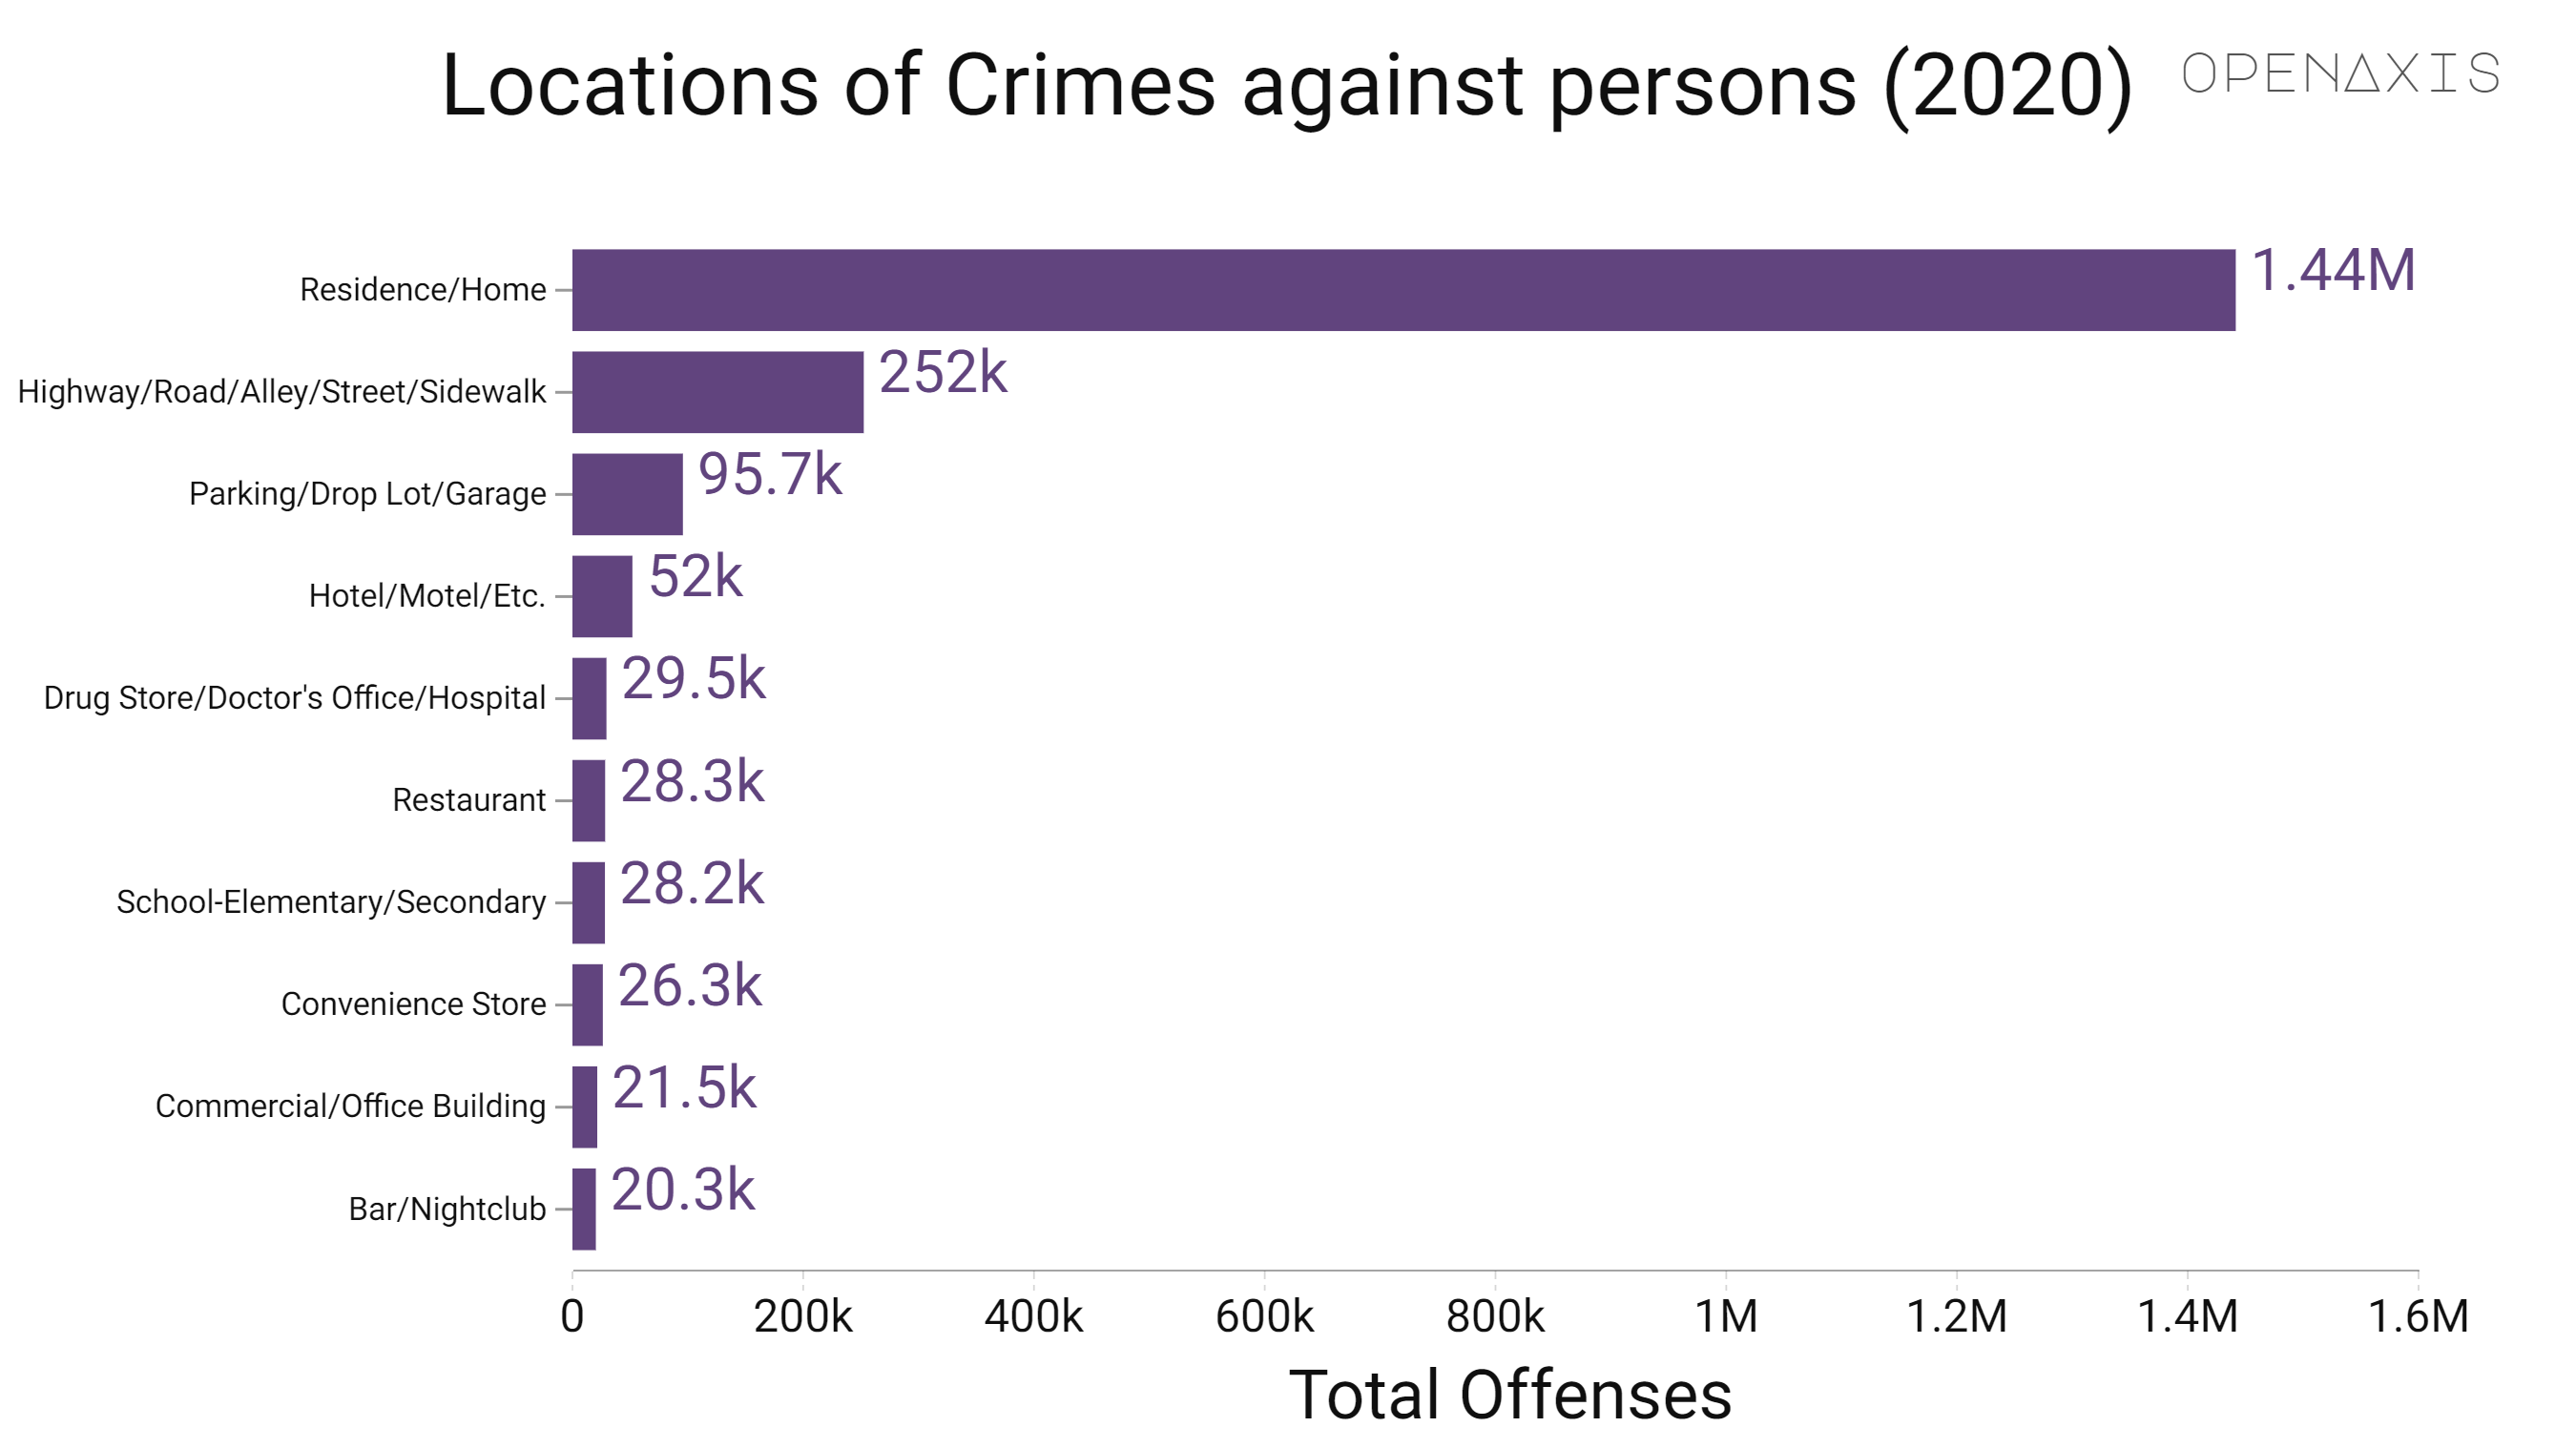 "Locations of Crimes against persons (2020)"